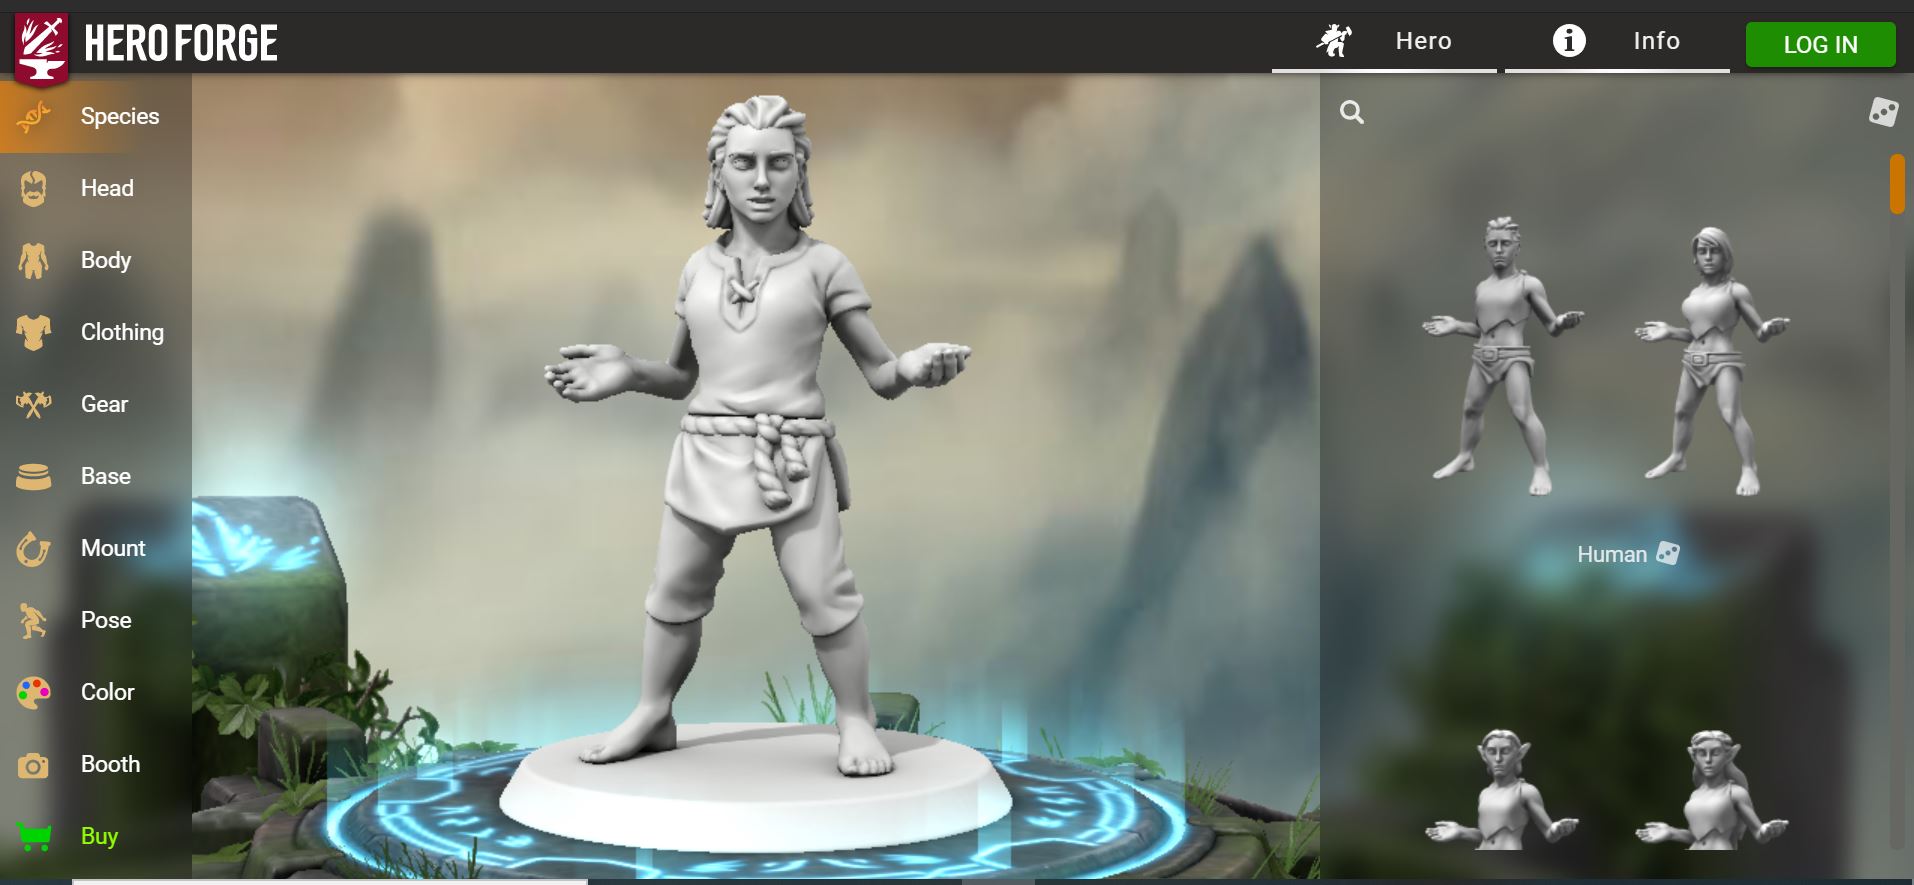 Find pricing, reviews and other details about HERO FORGE